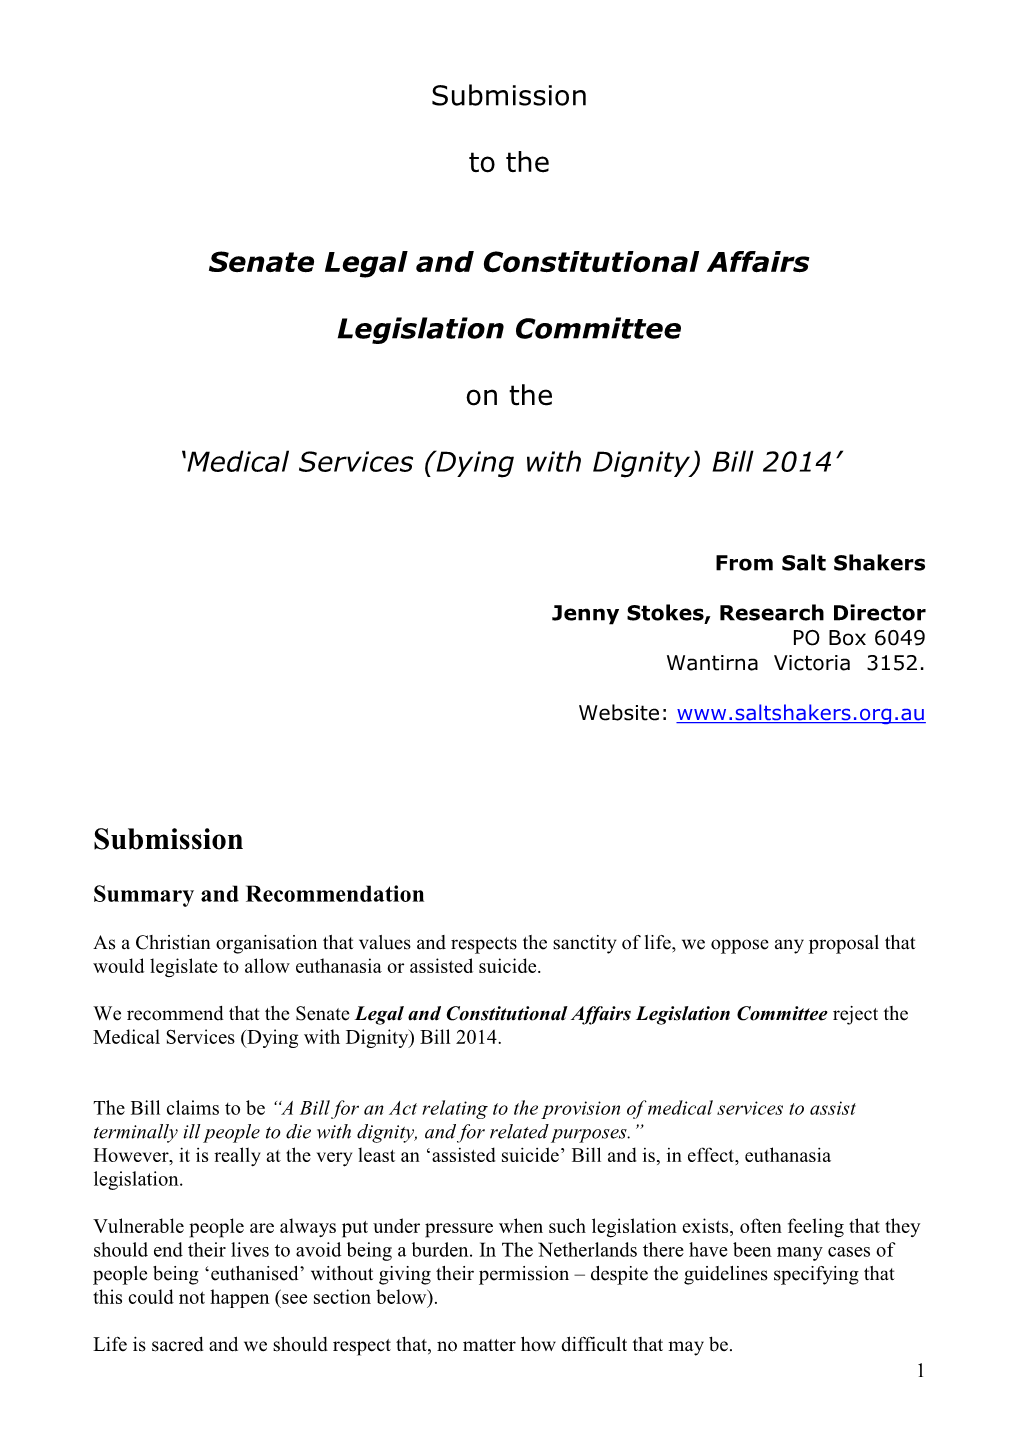 Medical Services (Dying with Dignity) Bill 2014’